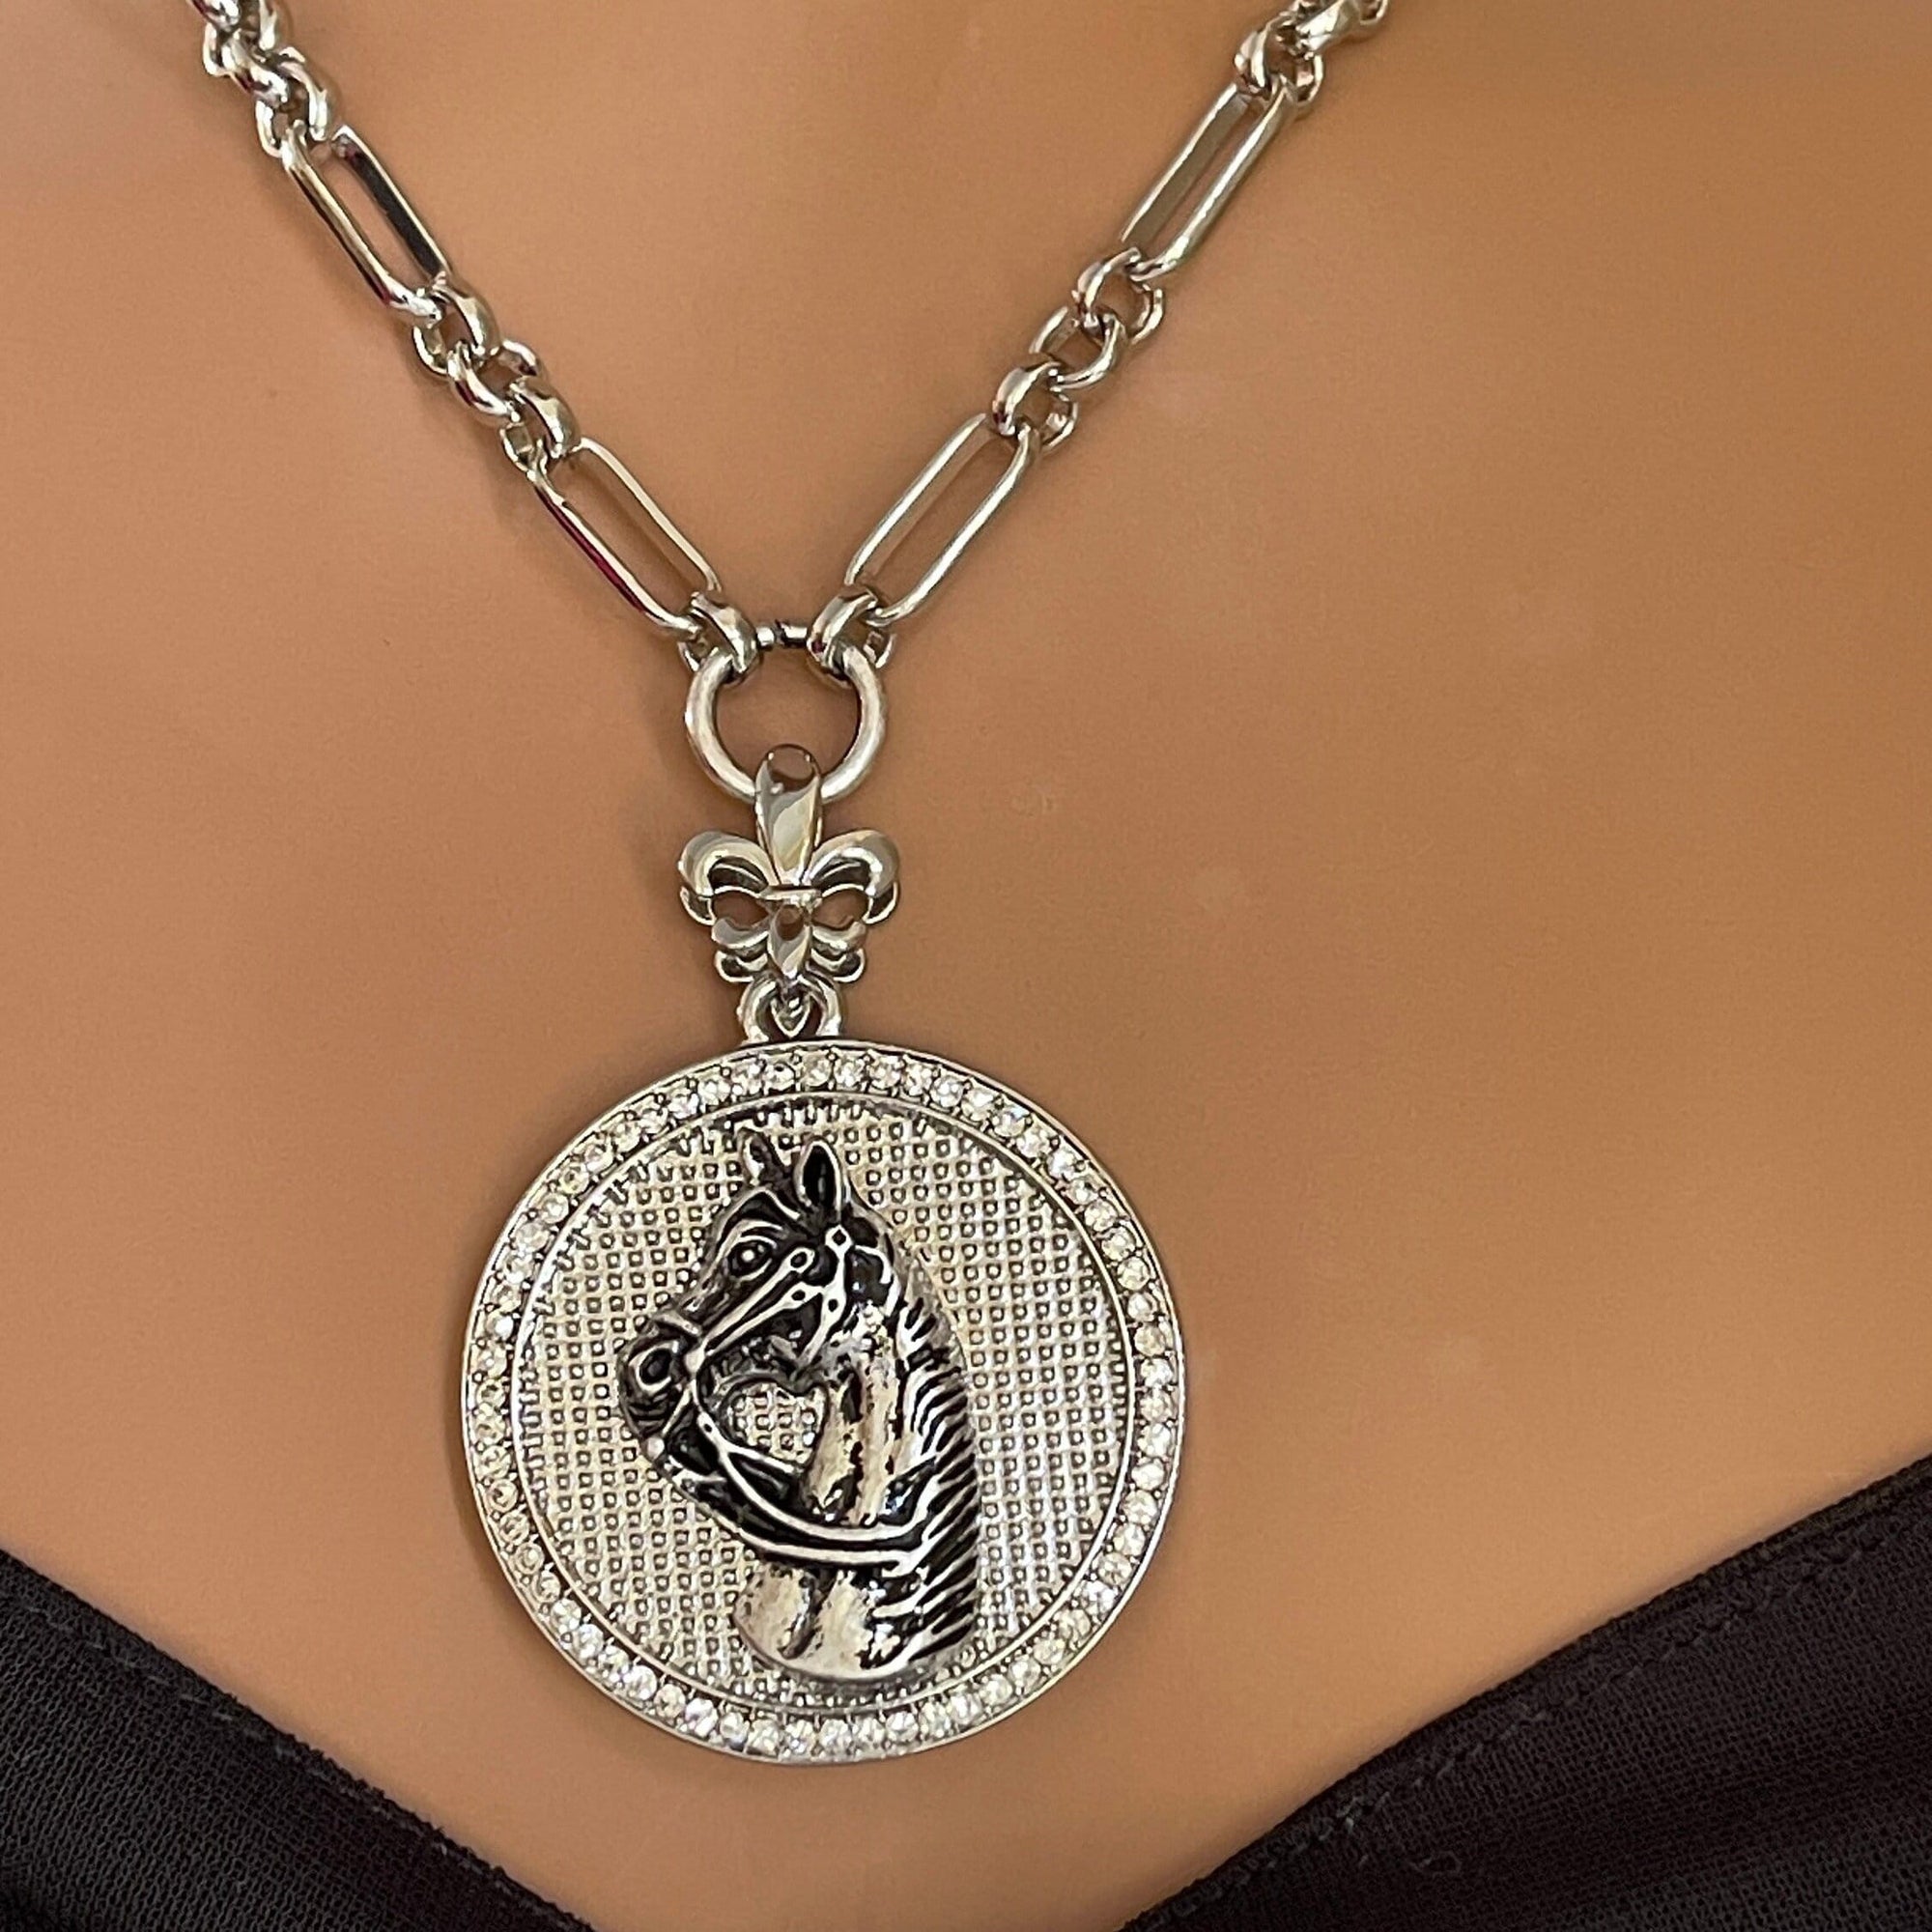 Silver Horse Pendant with CZ- Multilink Necklace Chain- Round Horse Charm- Equestrian Charm-Horse Equestrian Pendant, 2 Color options